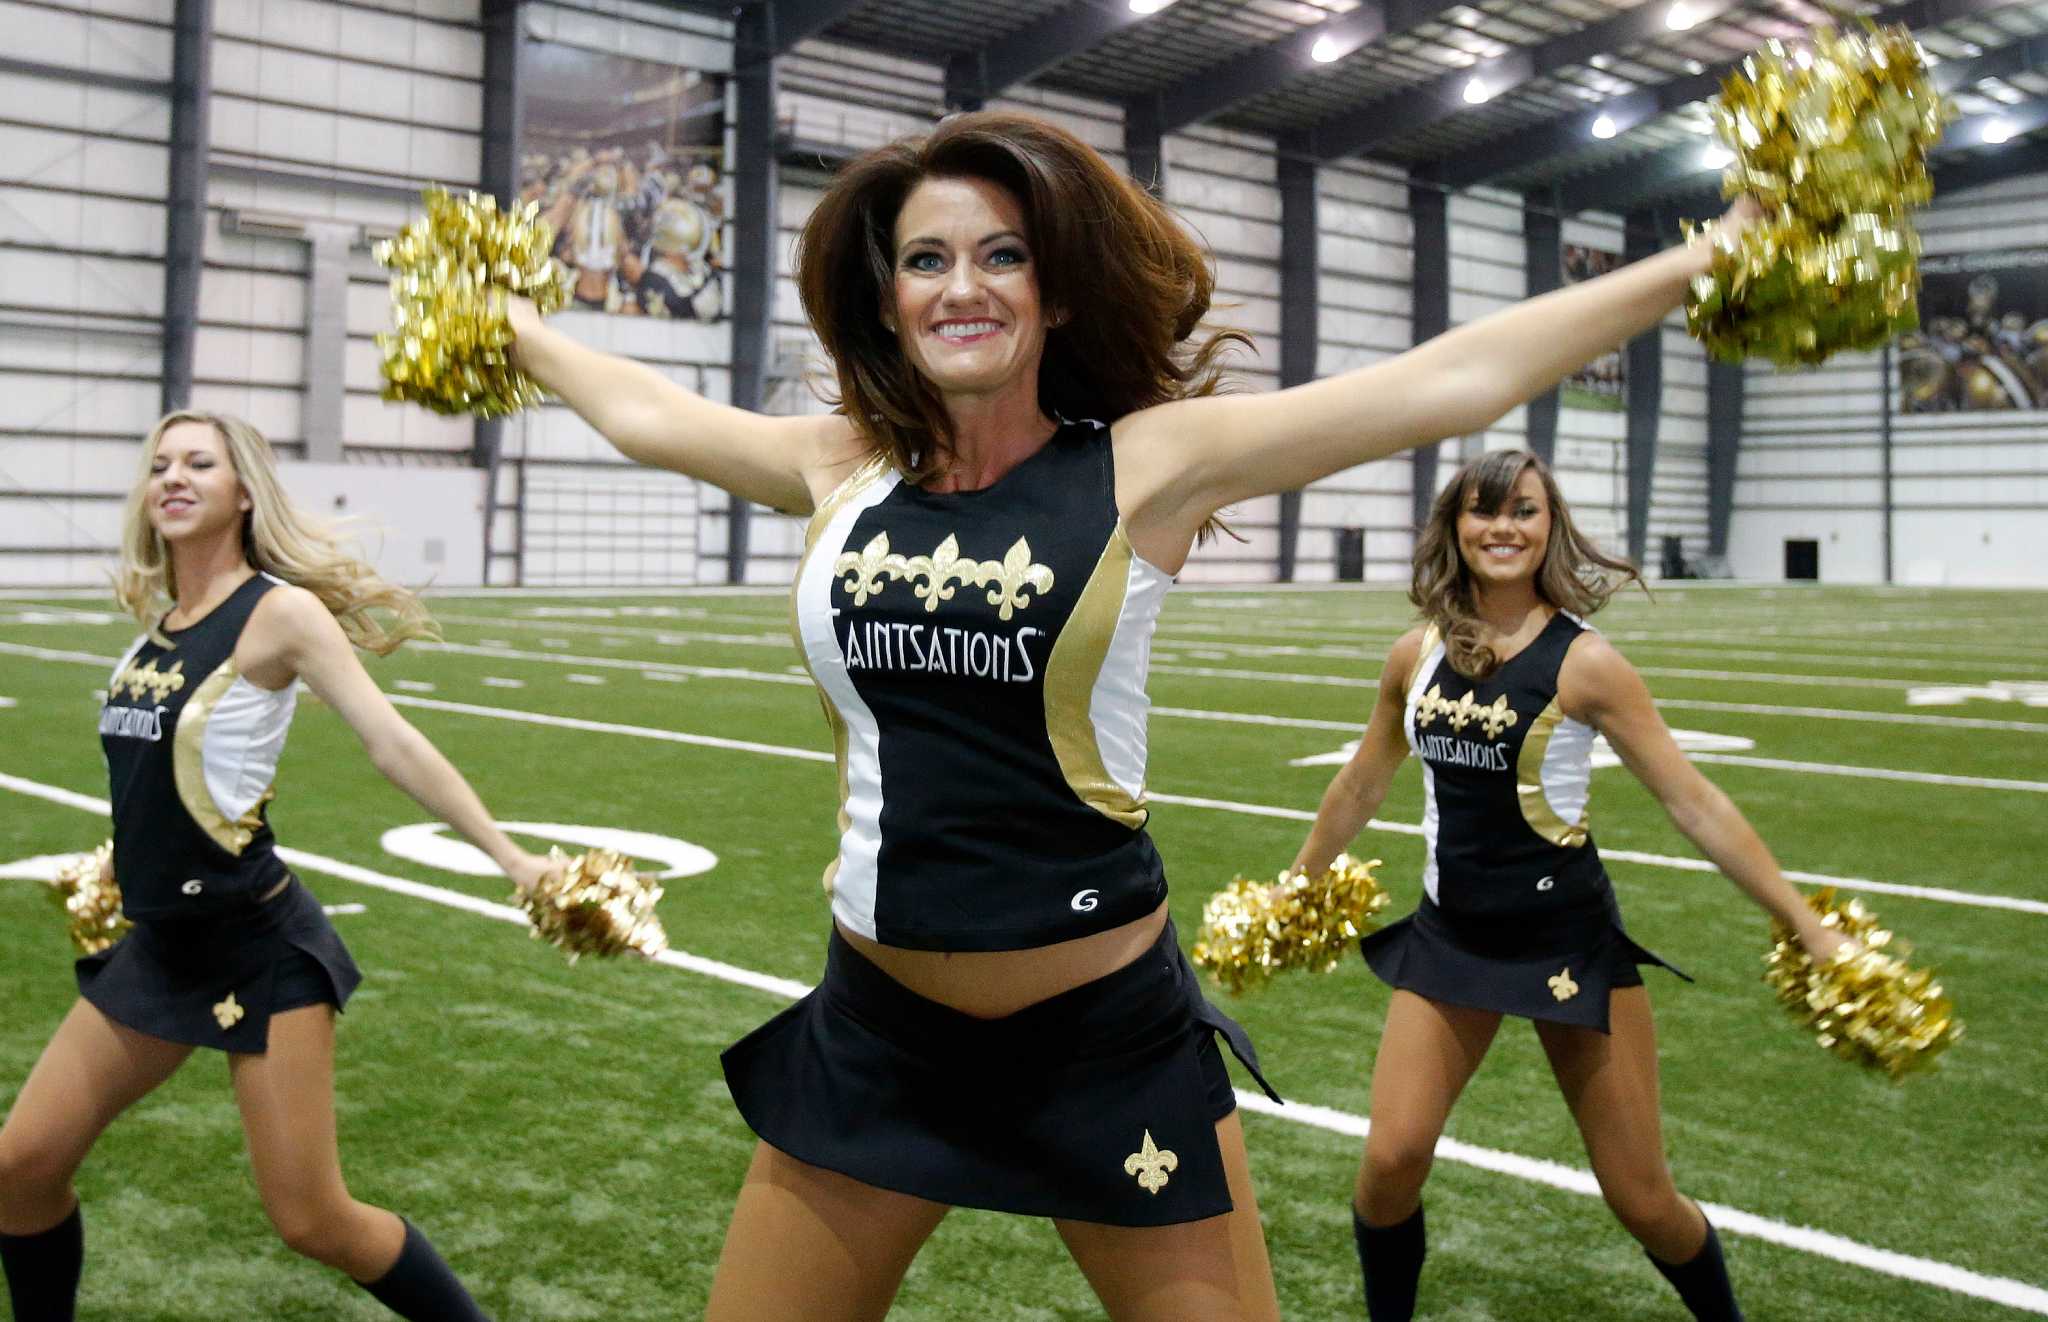 Dance instructor wins competition for spot on New Orleans Saints' squa...